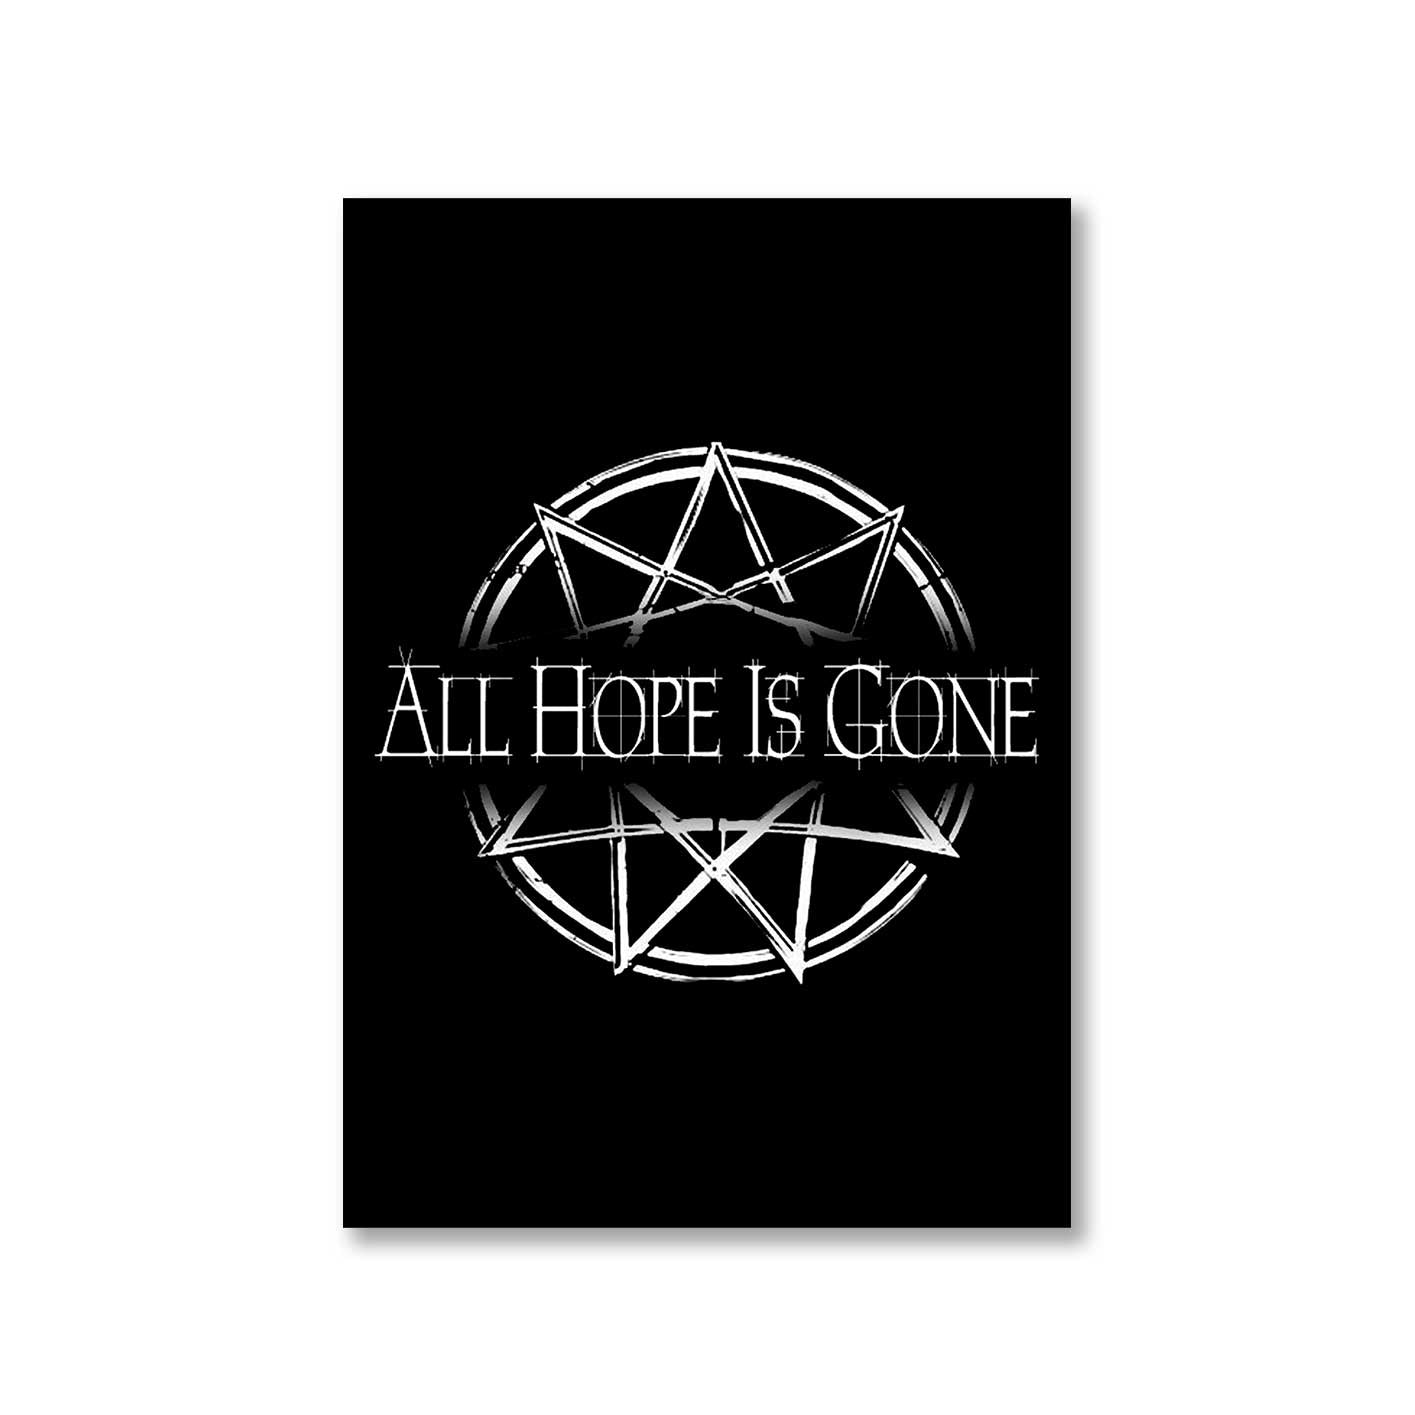 slipknot all hope is gone poster wall art buy online united states of america usa the banyan tee tbt a4